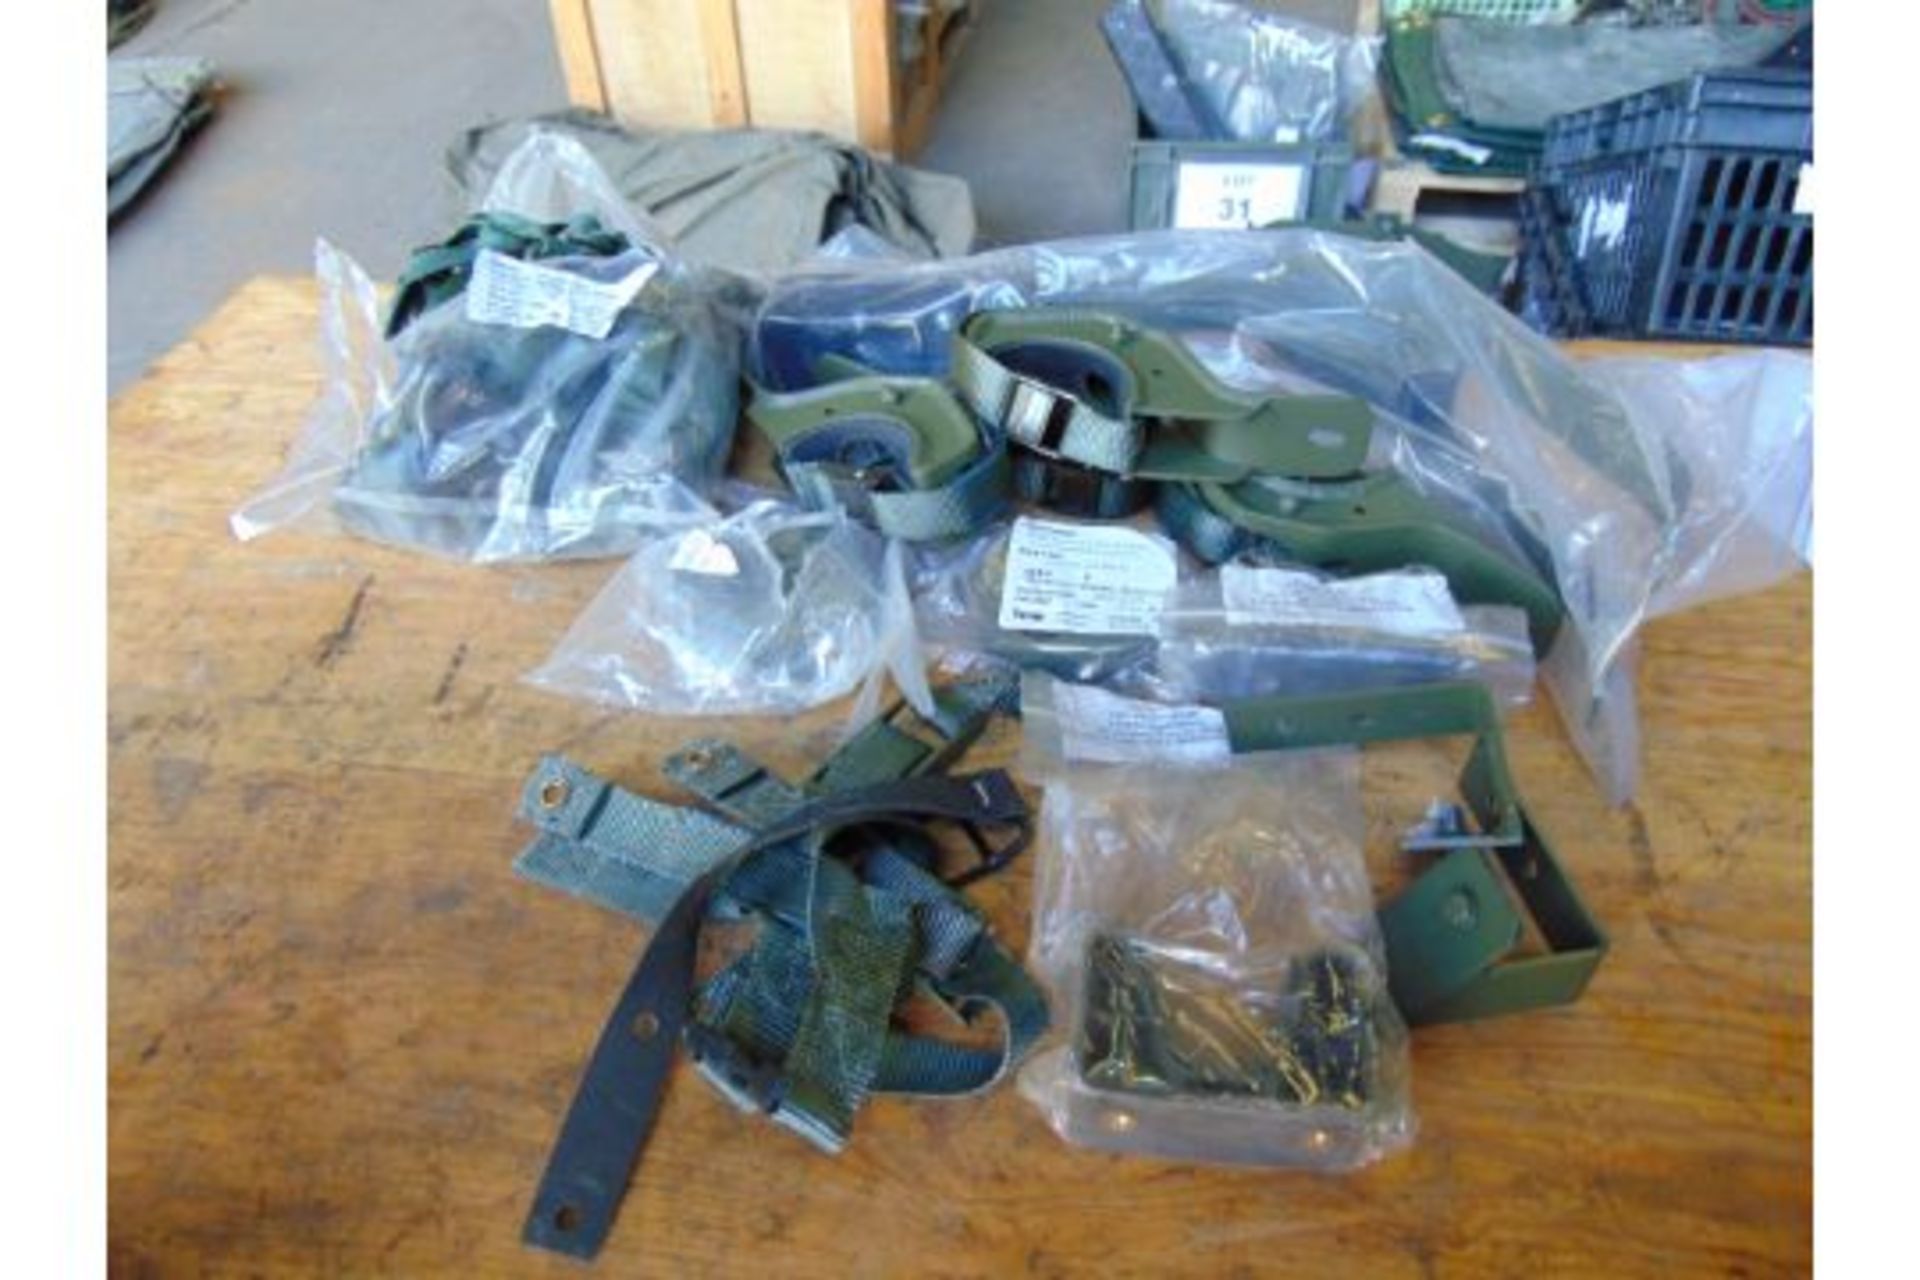 New Unissued WIMIK SA 80 Clips Launcher Covers, Stowage Straps, Barrel Clamps etc - Image 7 of 8